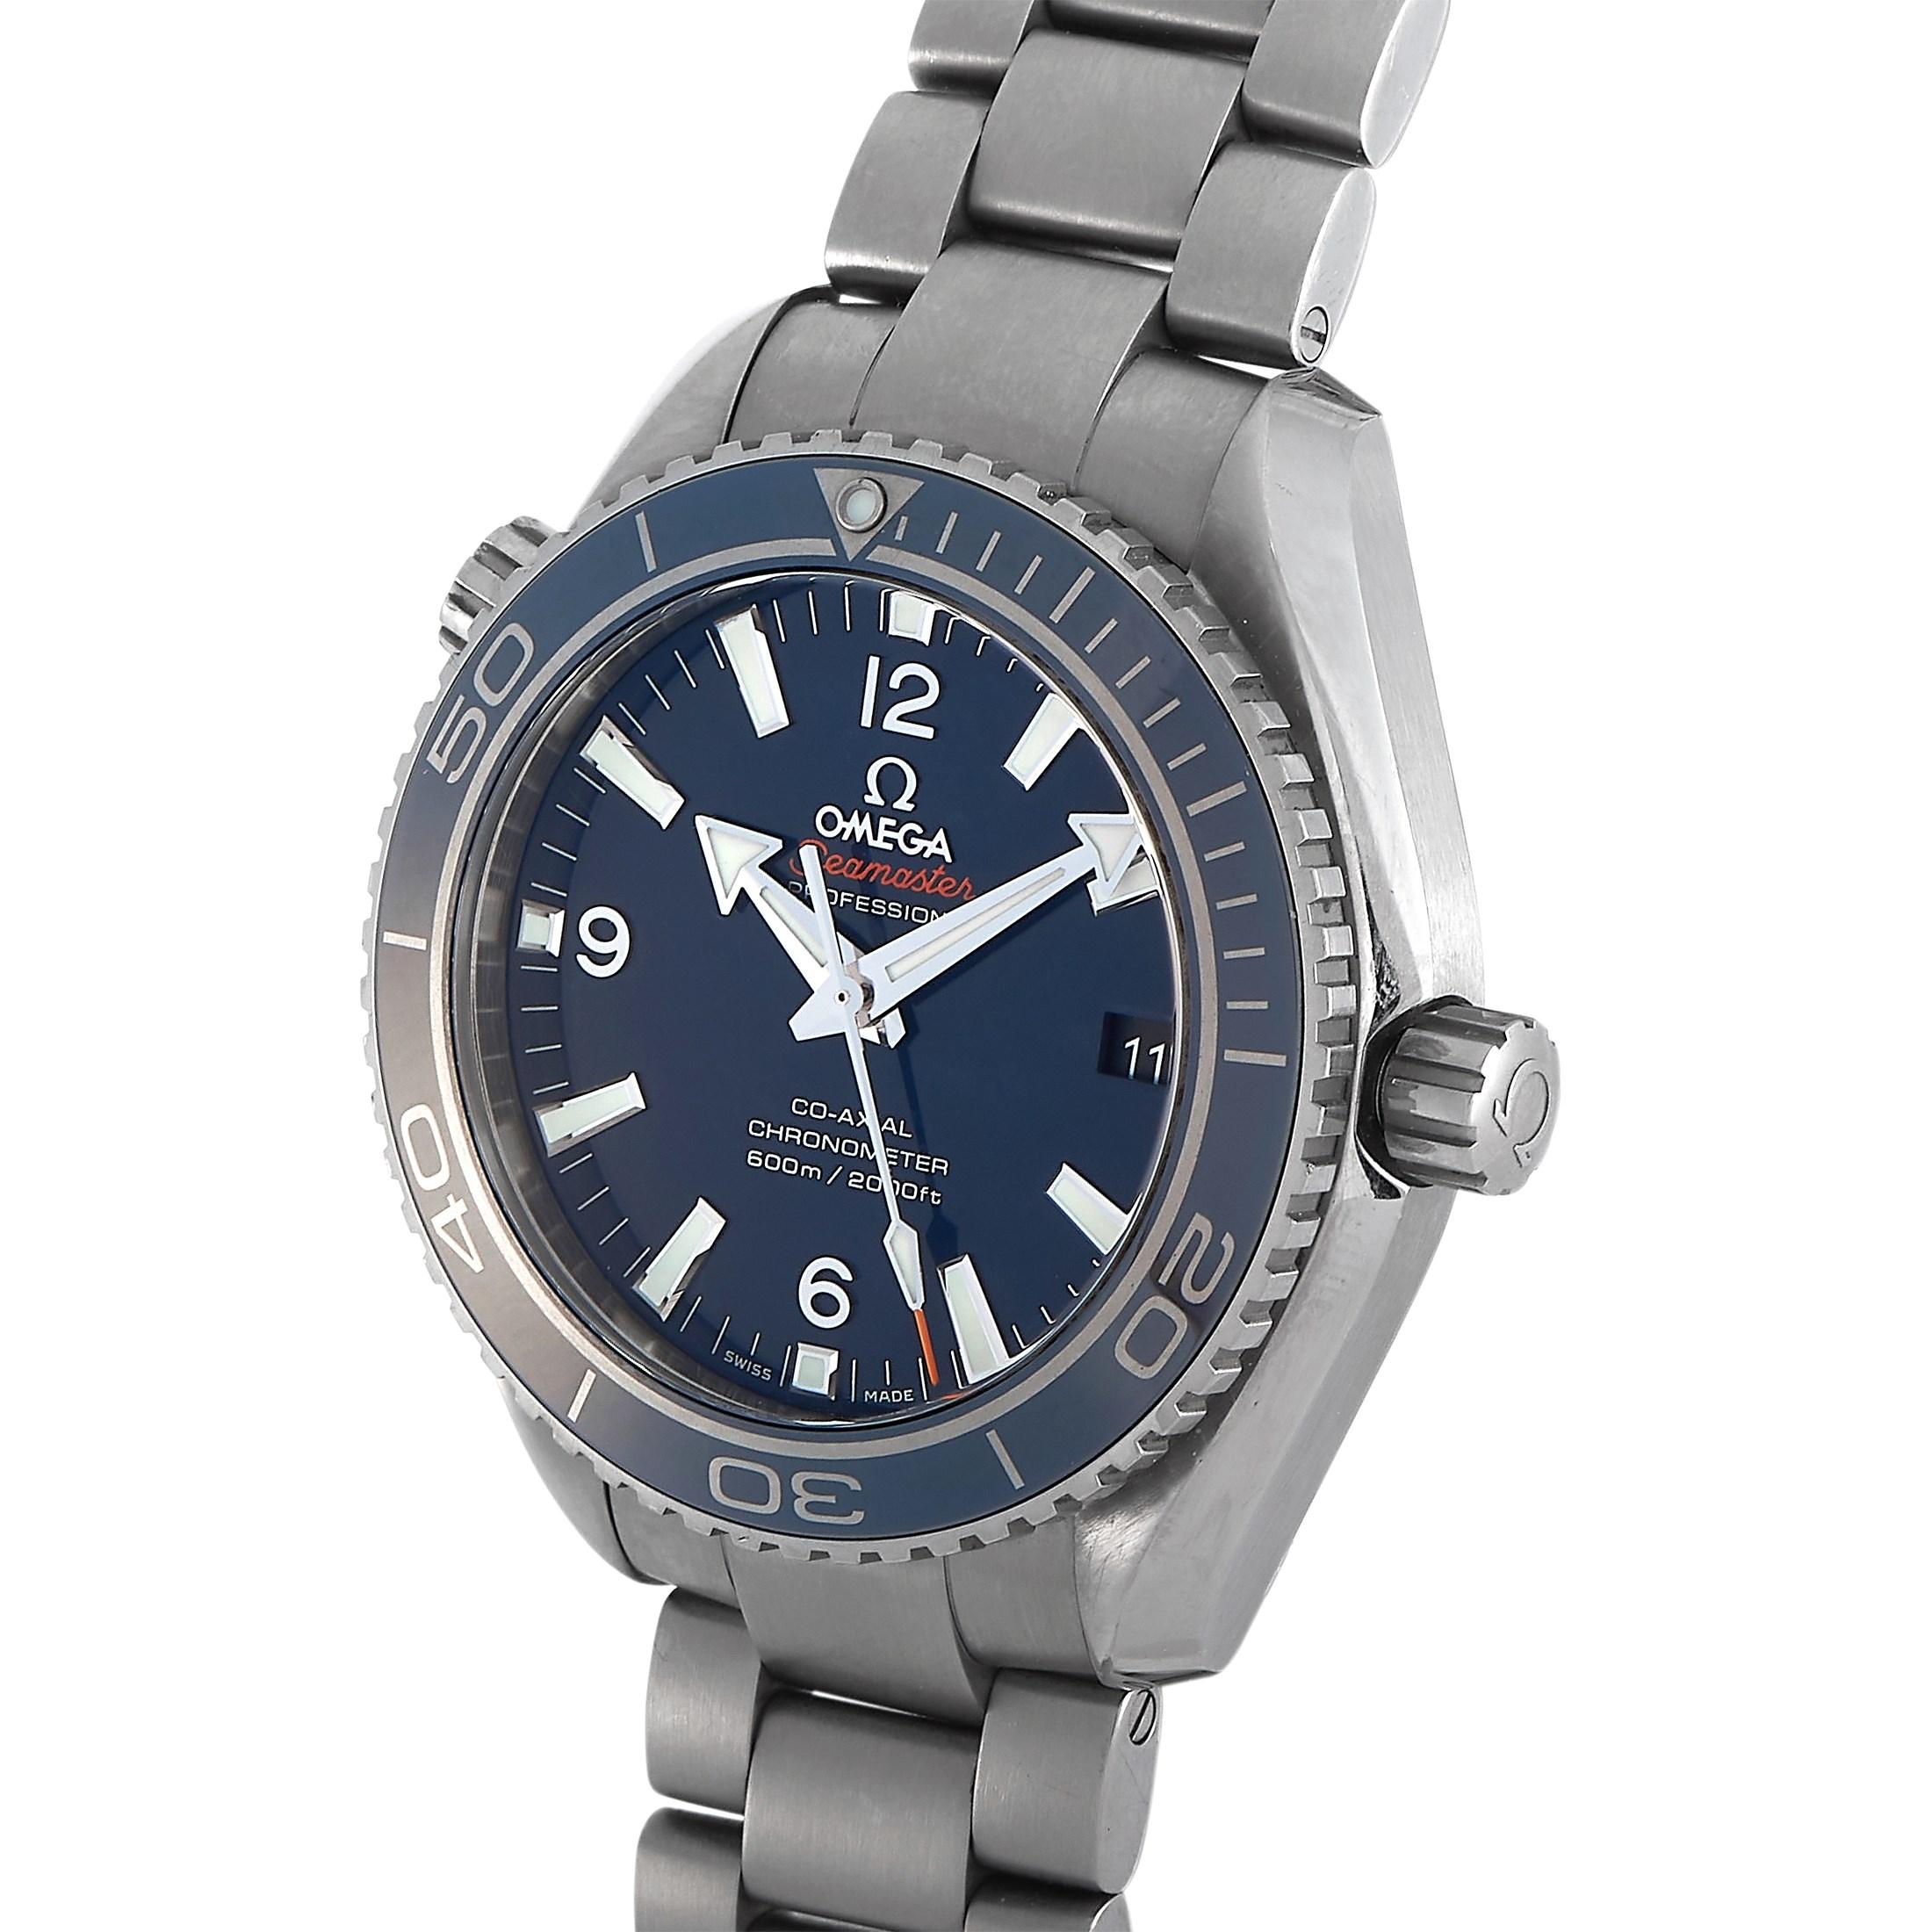 A titanium on titanium timepiece embodying OMEGA's dive watch heritage. The Seamaster  232.90.42.21.03.001 was part of the Planet Ocean line launched in 2005. This stylish watch has a blue dial and matching blue unidirectional rotating bezel in